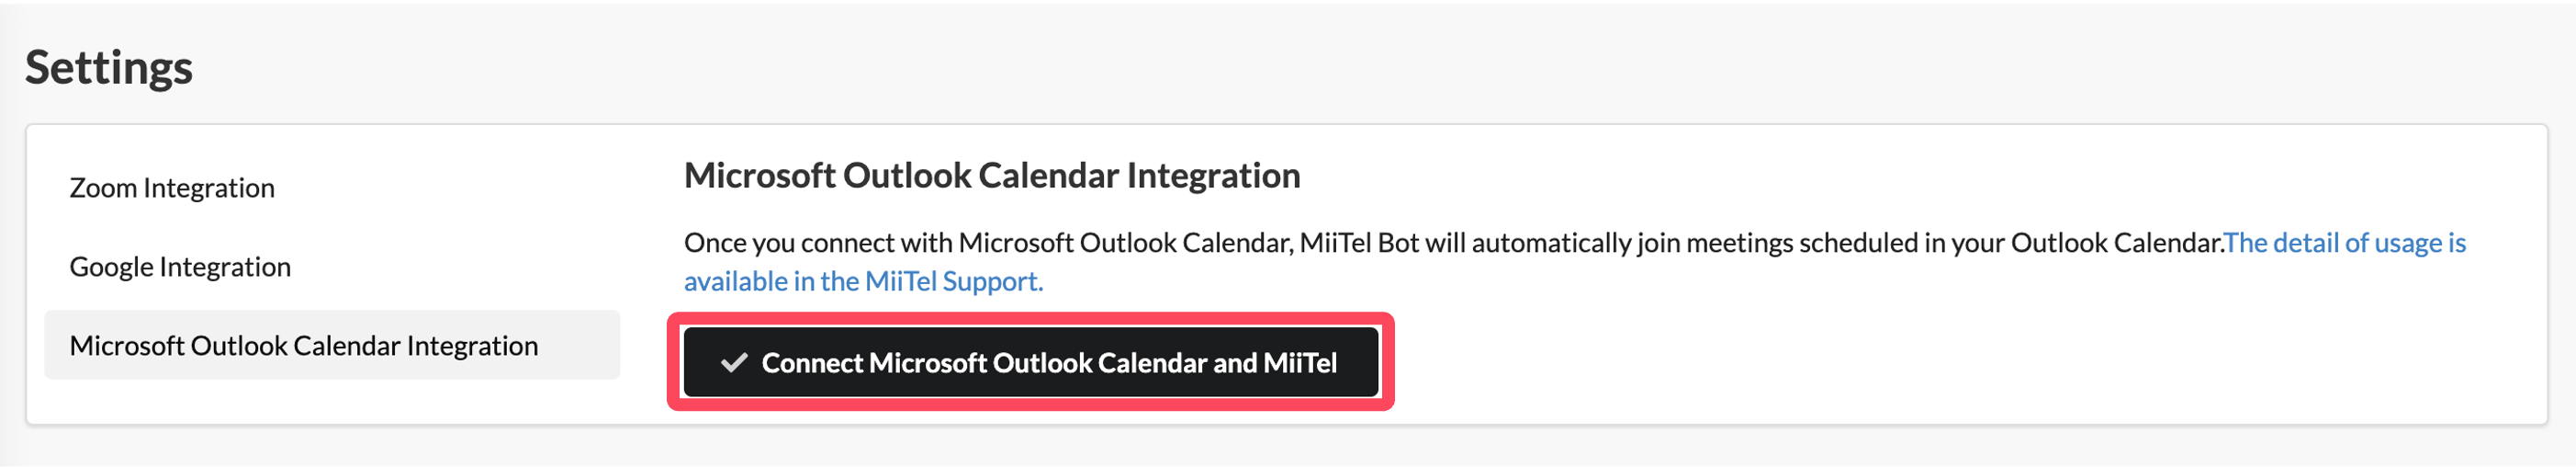 outlook_integration_button.png